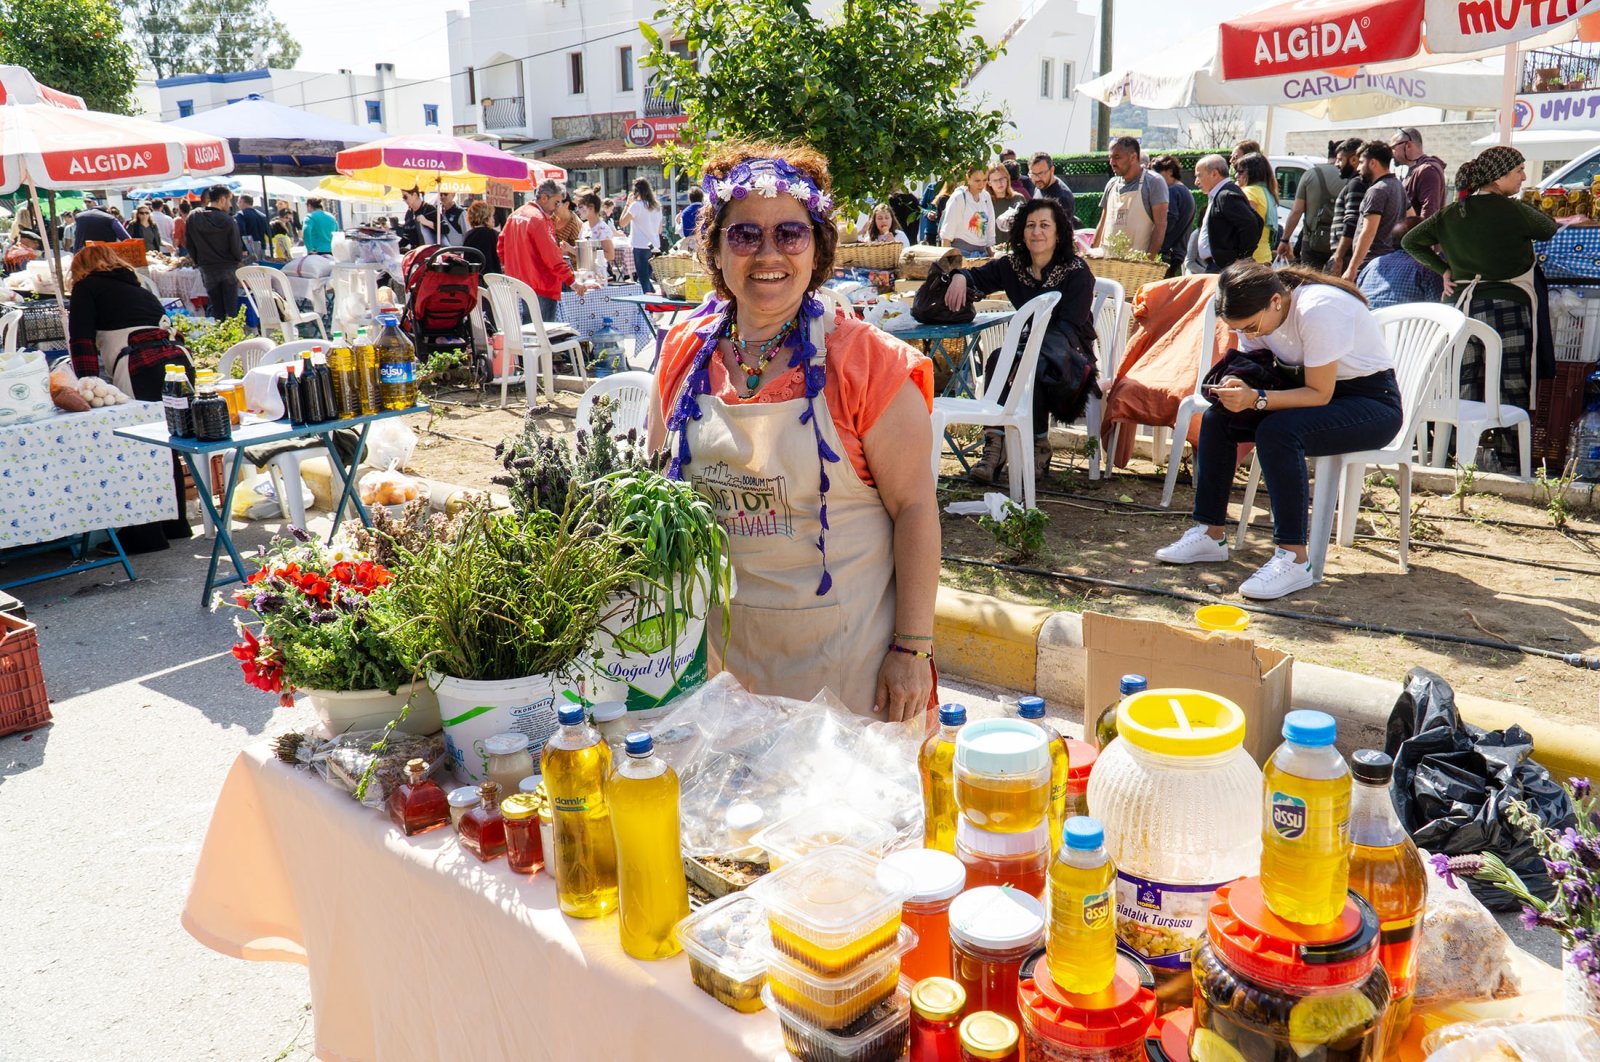 A young woman sells vegetables, fruits and olive oil at a festival, in Bodrum, Turkey, March 15, 2020. (Shutterstock Photo)